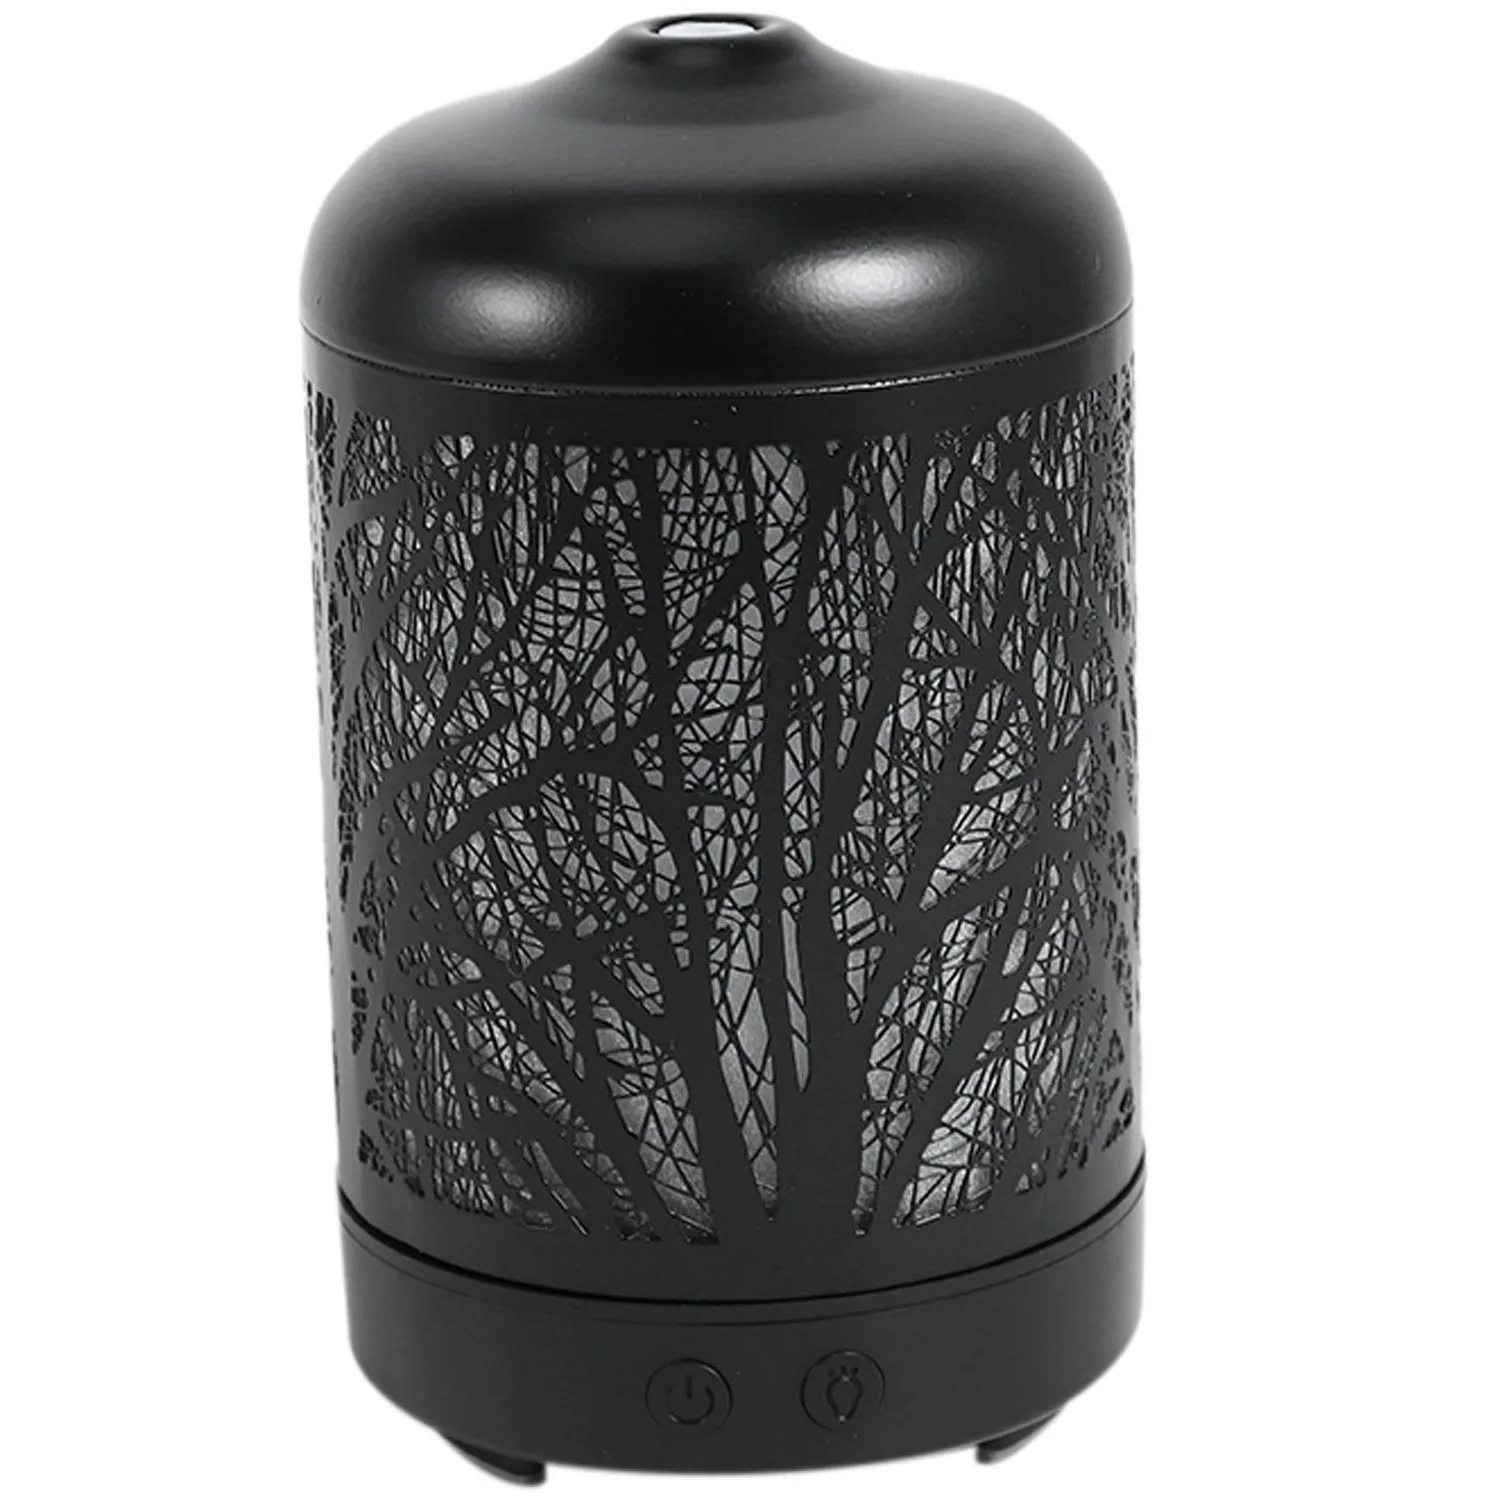 

Metal Tree Essential Oil Diffuser 100Ml Diffuser Ultrasonic Aromatherapy Humidifier Cool Mist Maker for Home Office Us Plug